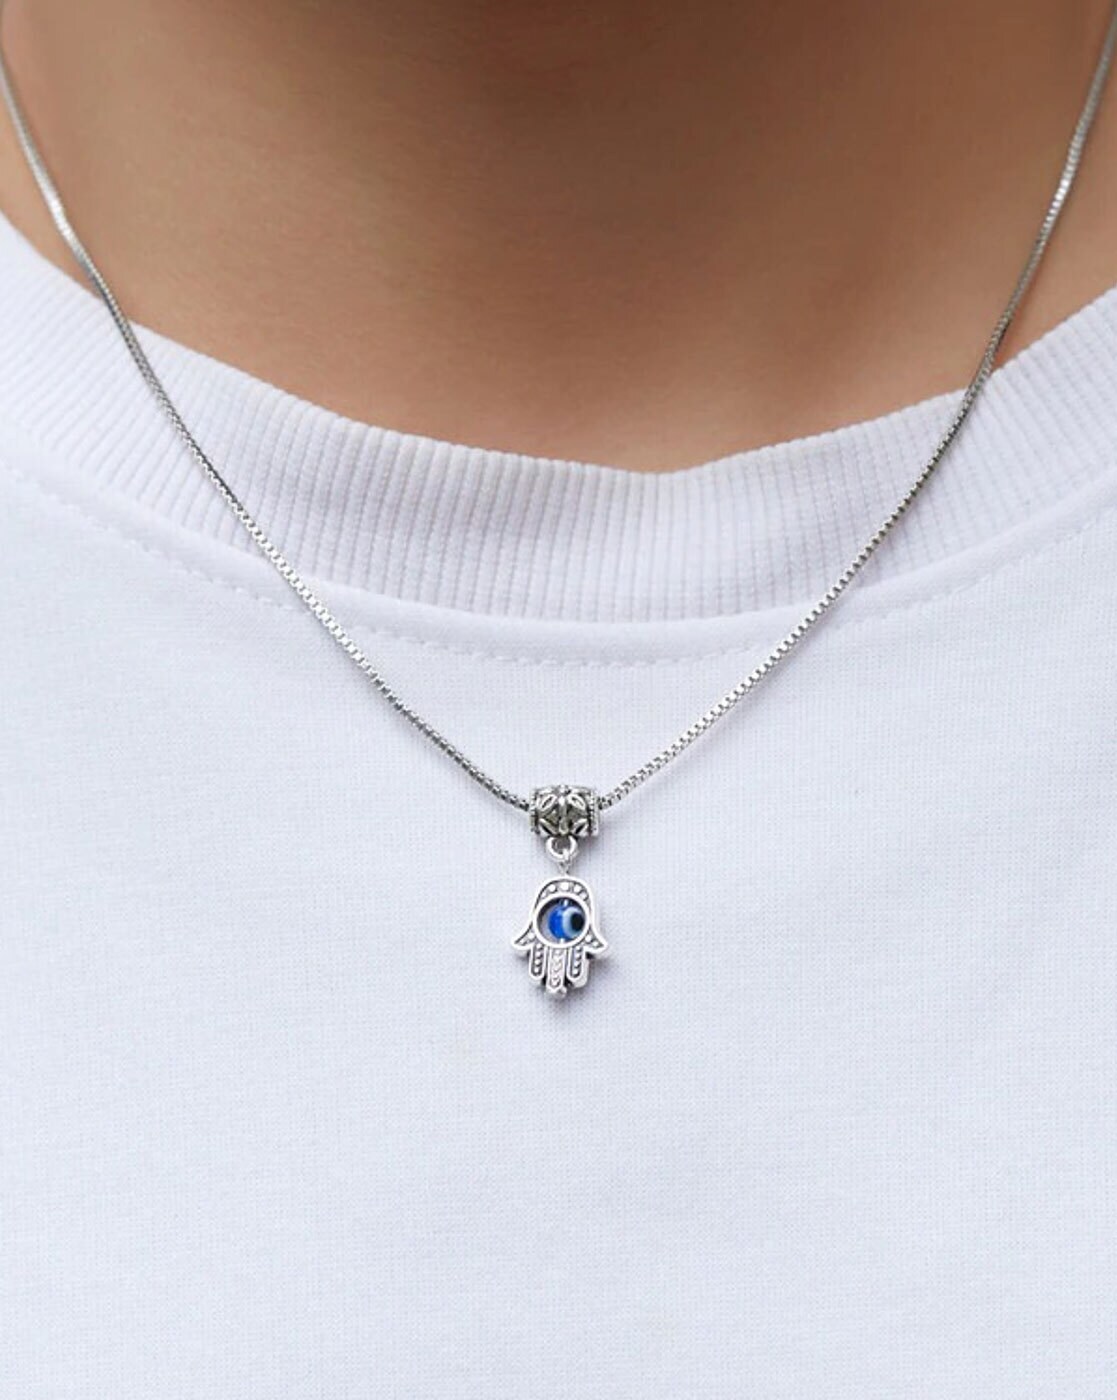 Buy Hamsa Hand Necklace, Evil Eye Silver Plated Pendant, Hand of Fatima  Pendant, Judaica Jewelry, Mano De Fatima, Fashion Protection Necklace  Online in India - Etsy